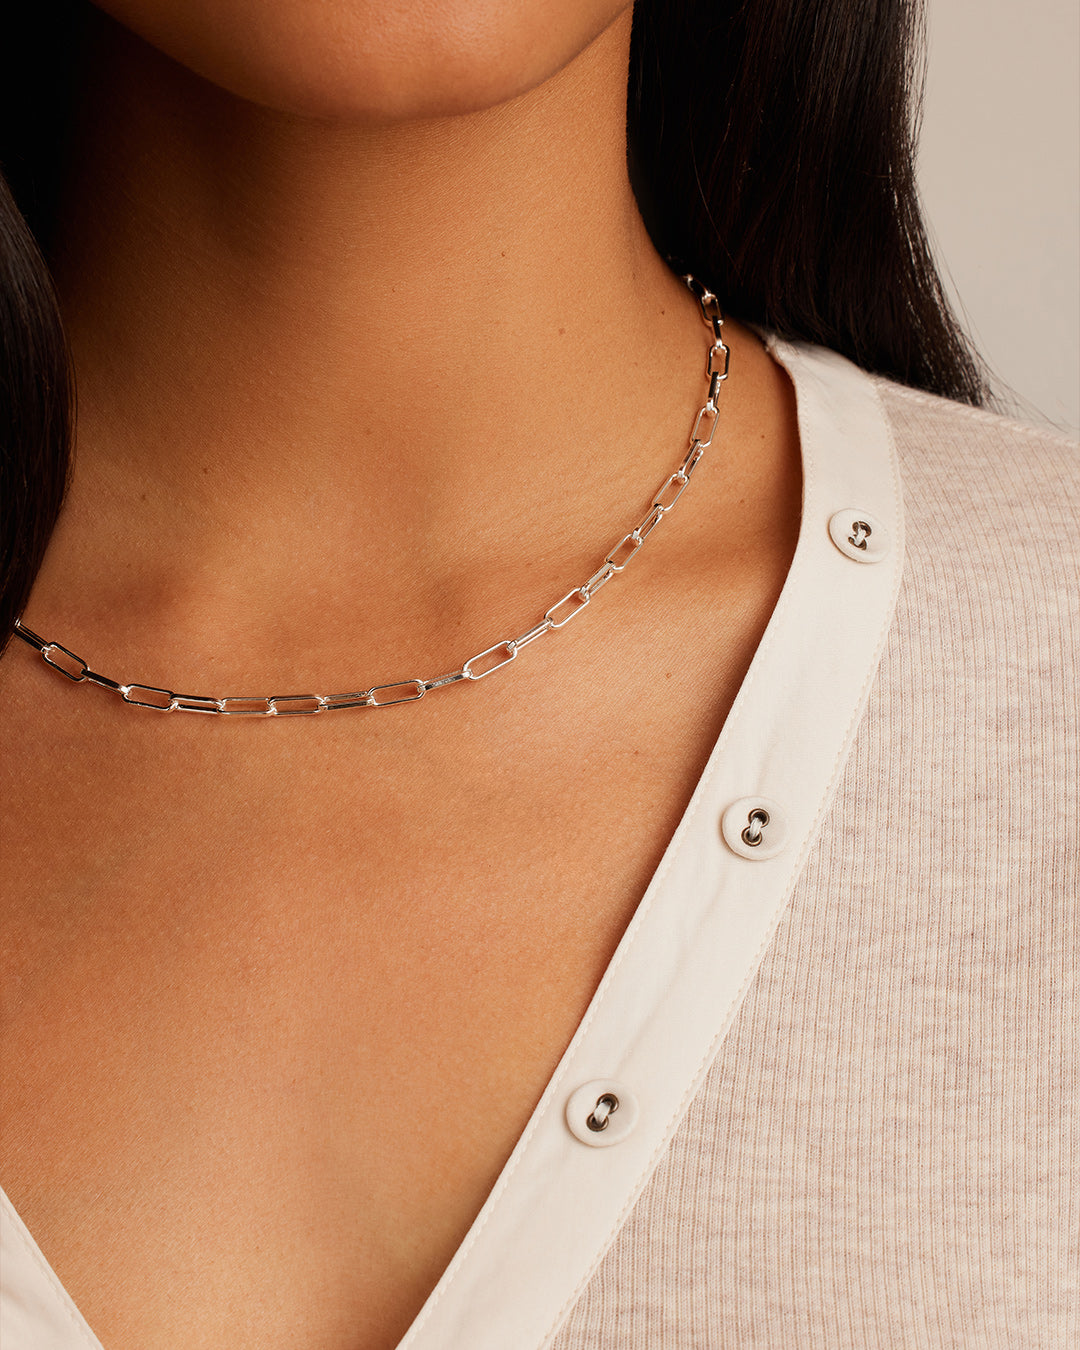 Why Chain Necklaces Are an Everyday Essential